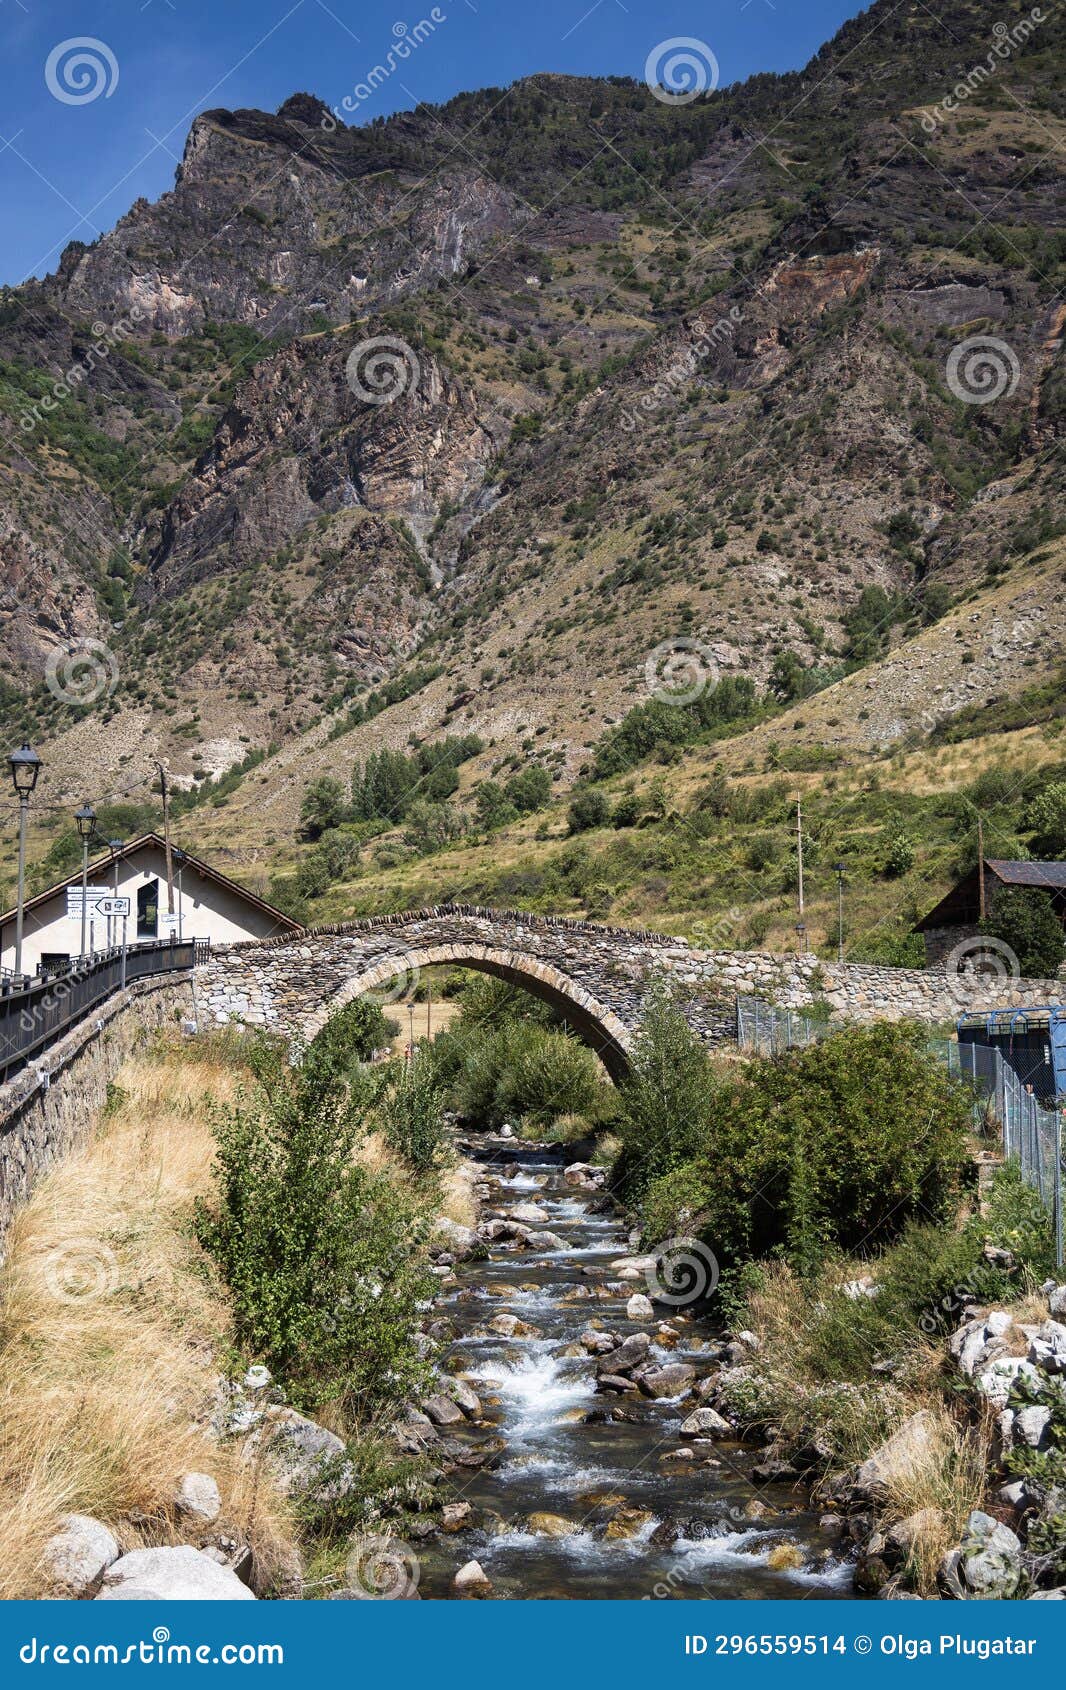 medieval stone bridge over the river in espot village in pyrenees mountains